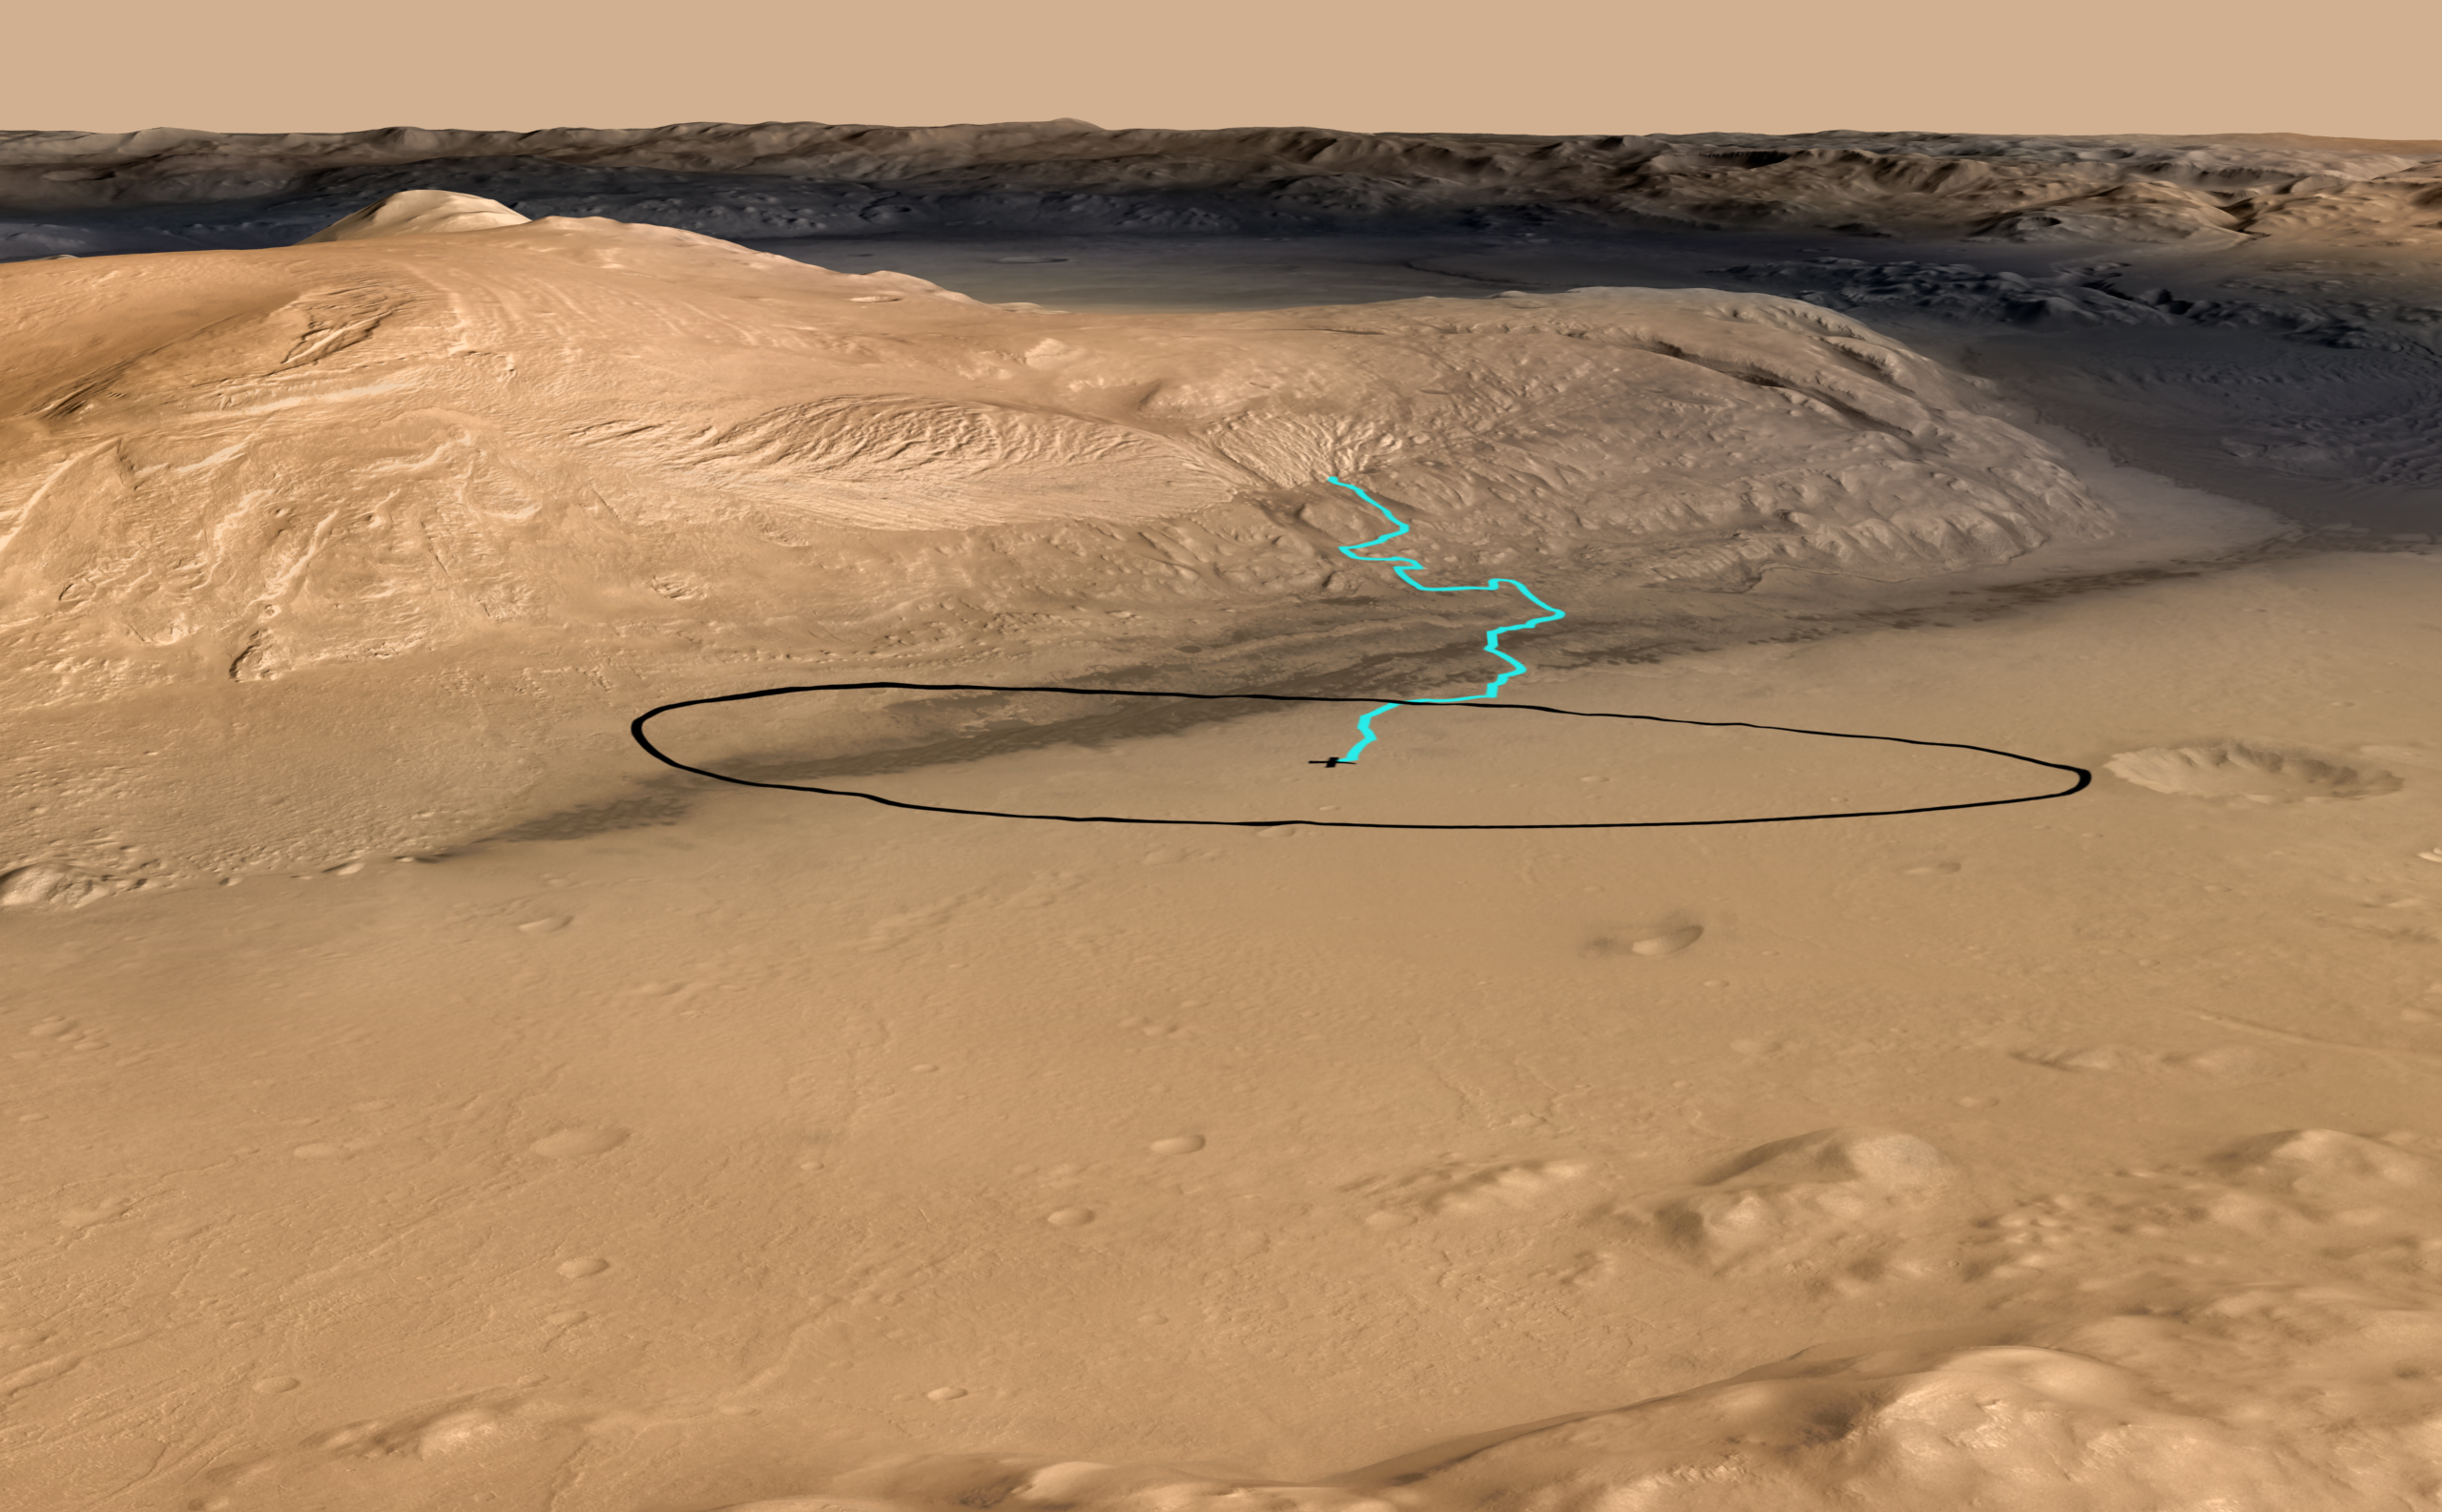 As of June 2012, the target landing area for Curiosity, the rover inside NASA's Mars Science Laboratory spacecraft, is the ellipse marked in black on this image.